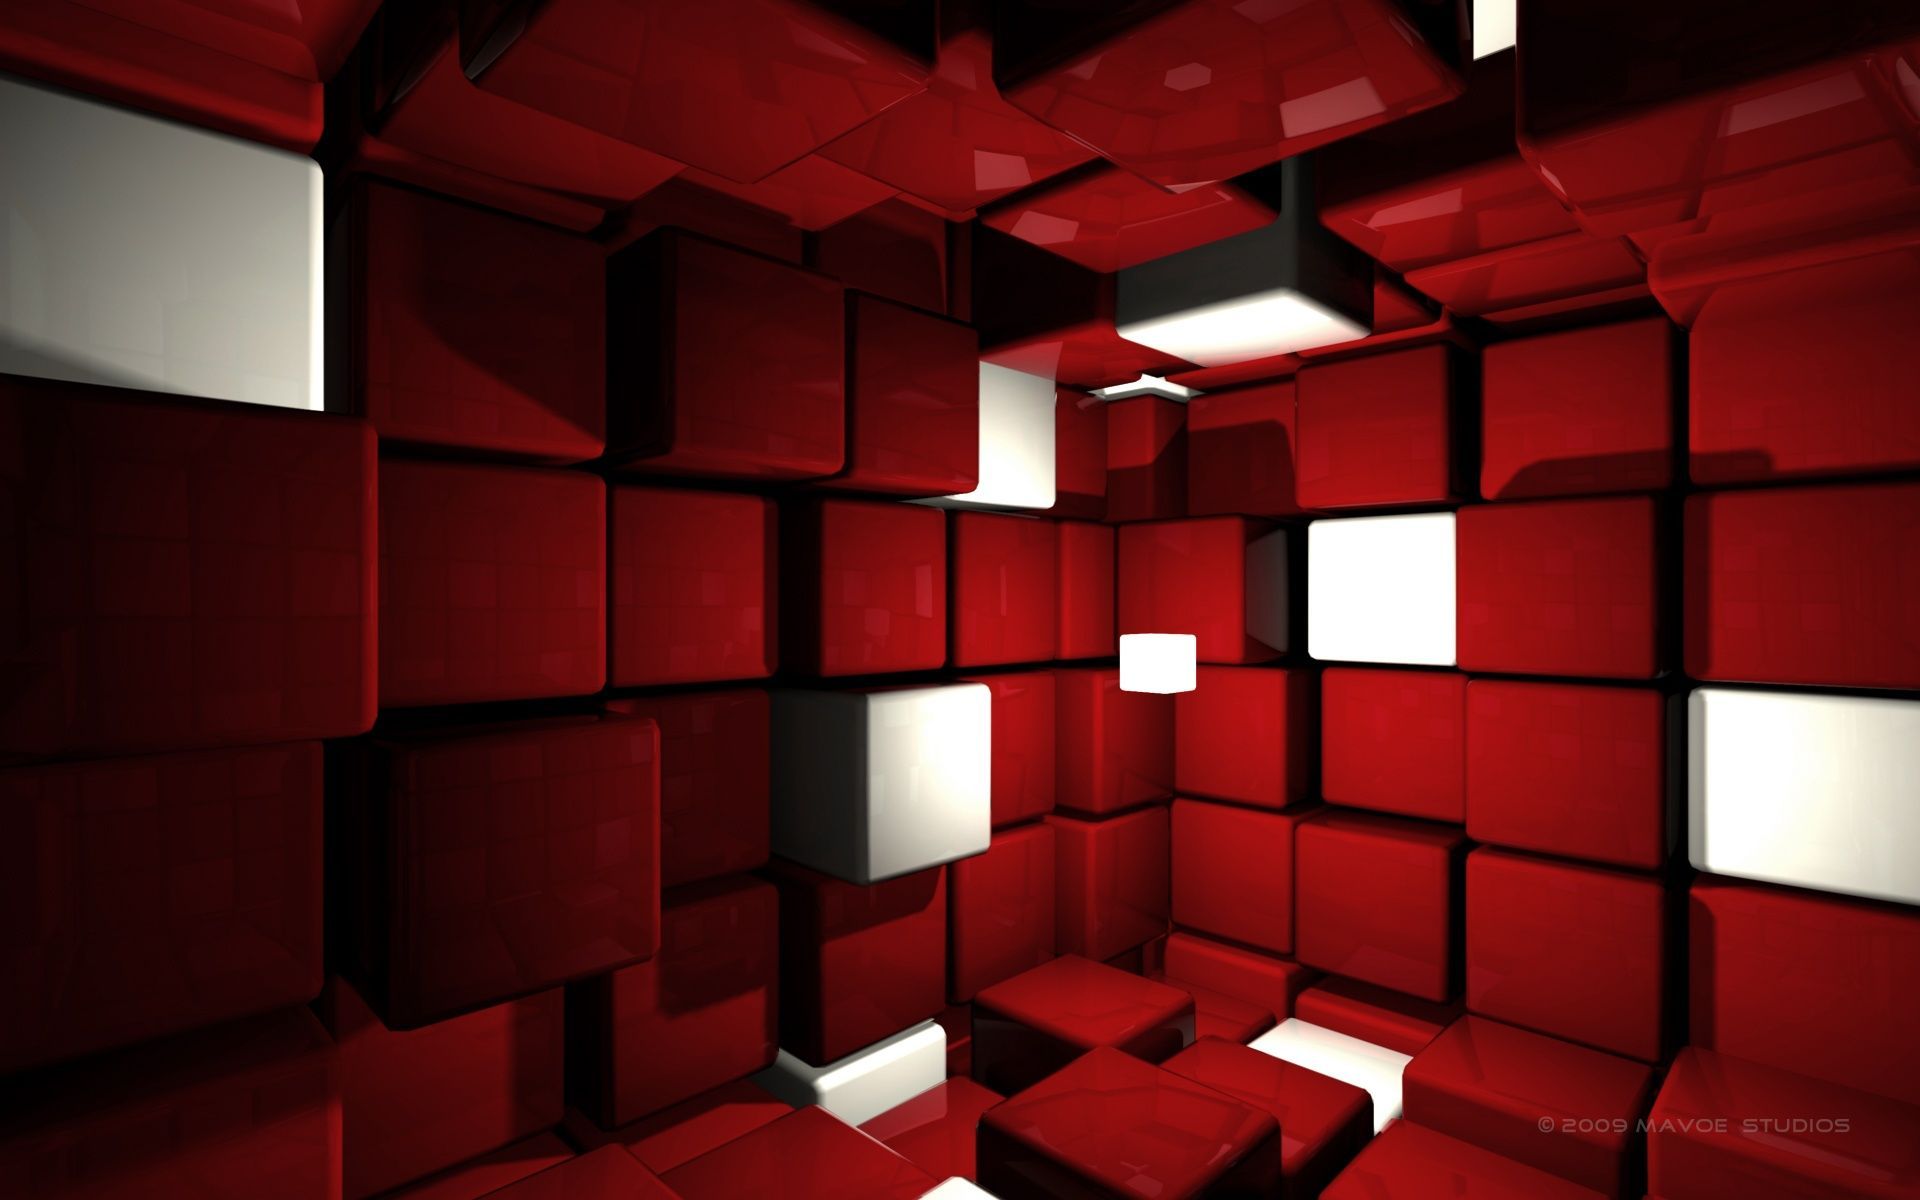 Room with Red Cubes | Photo and Desktop Wallpaper